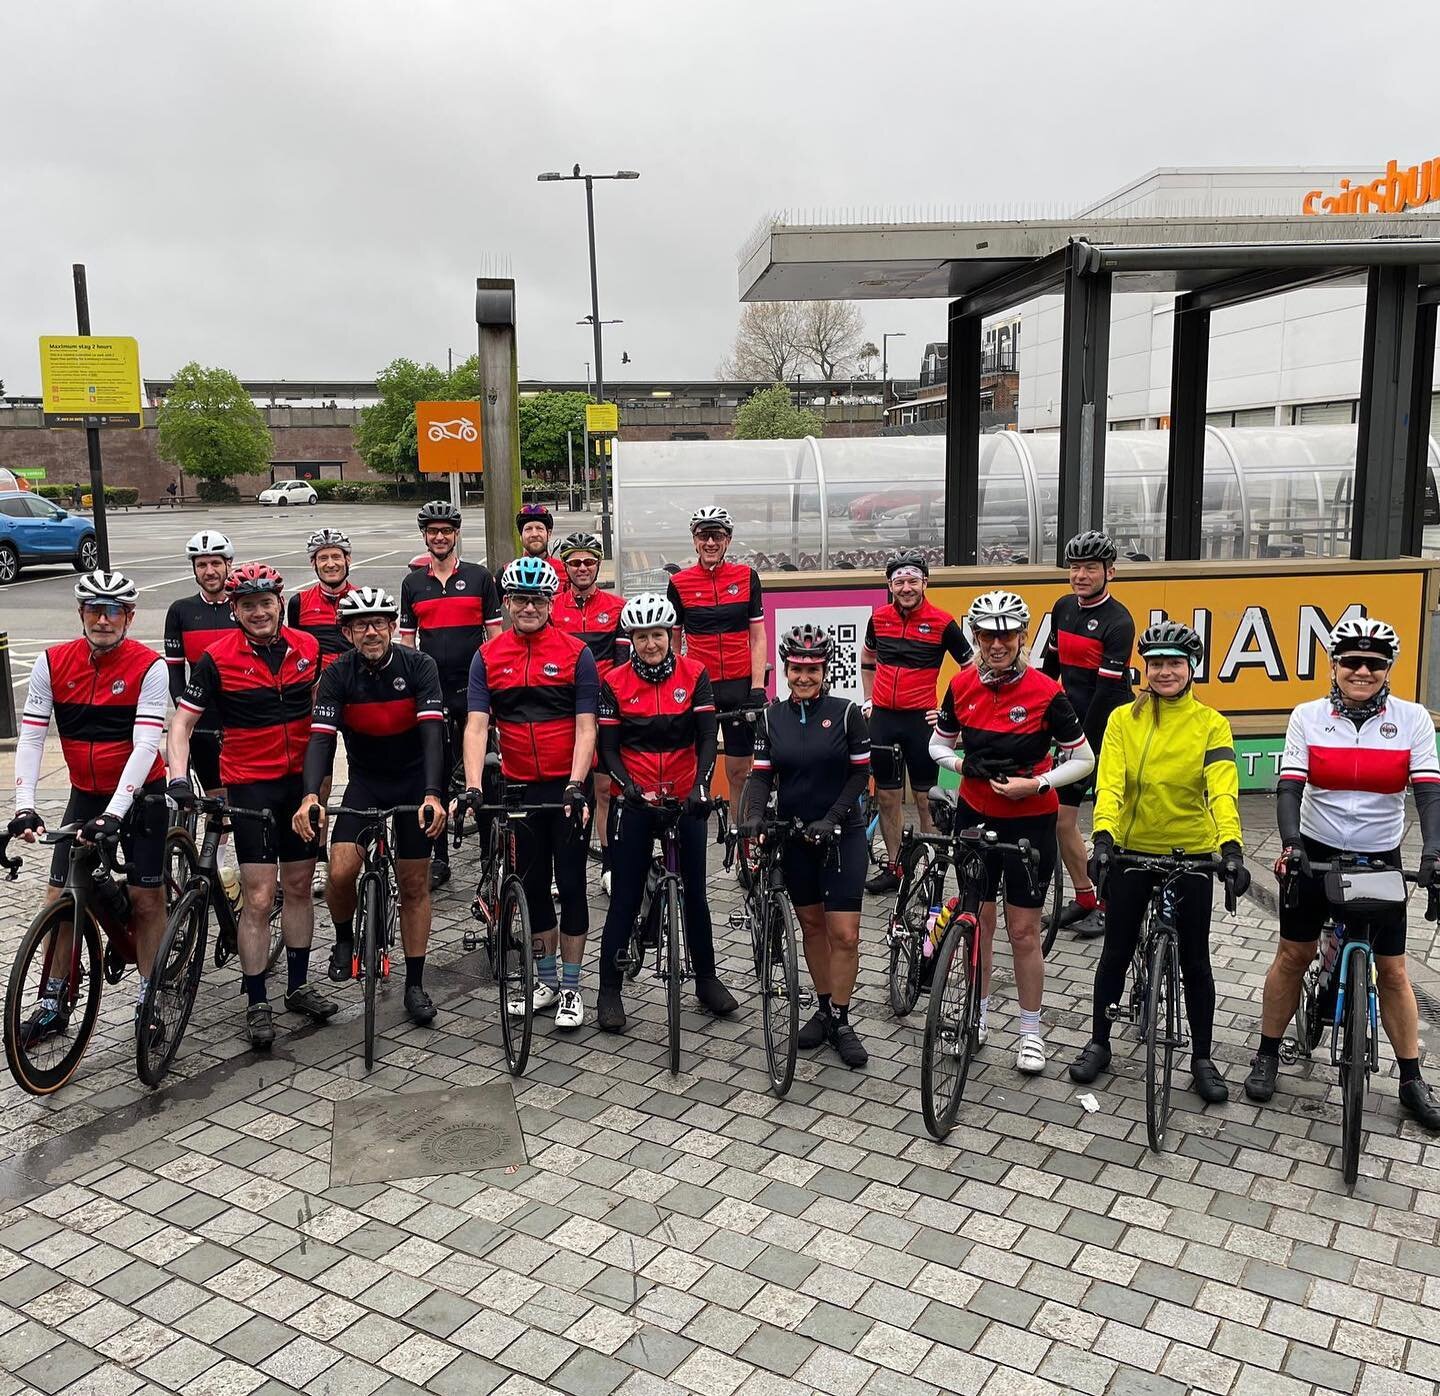 Coronation Bank Holiday weekend - plenty of cycling, all weathers. #ridewithmates #cyclingclub.  And BCC members in Sardinia #bccontour